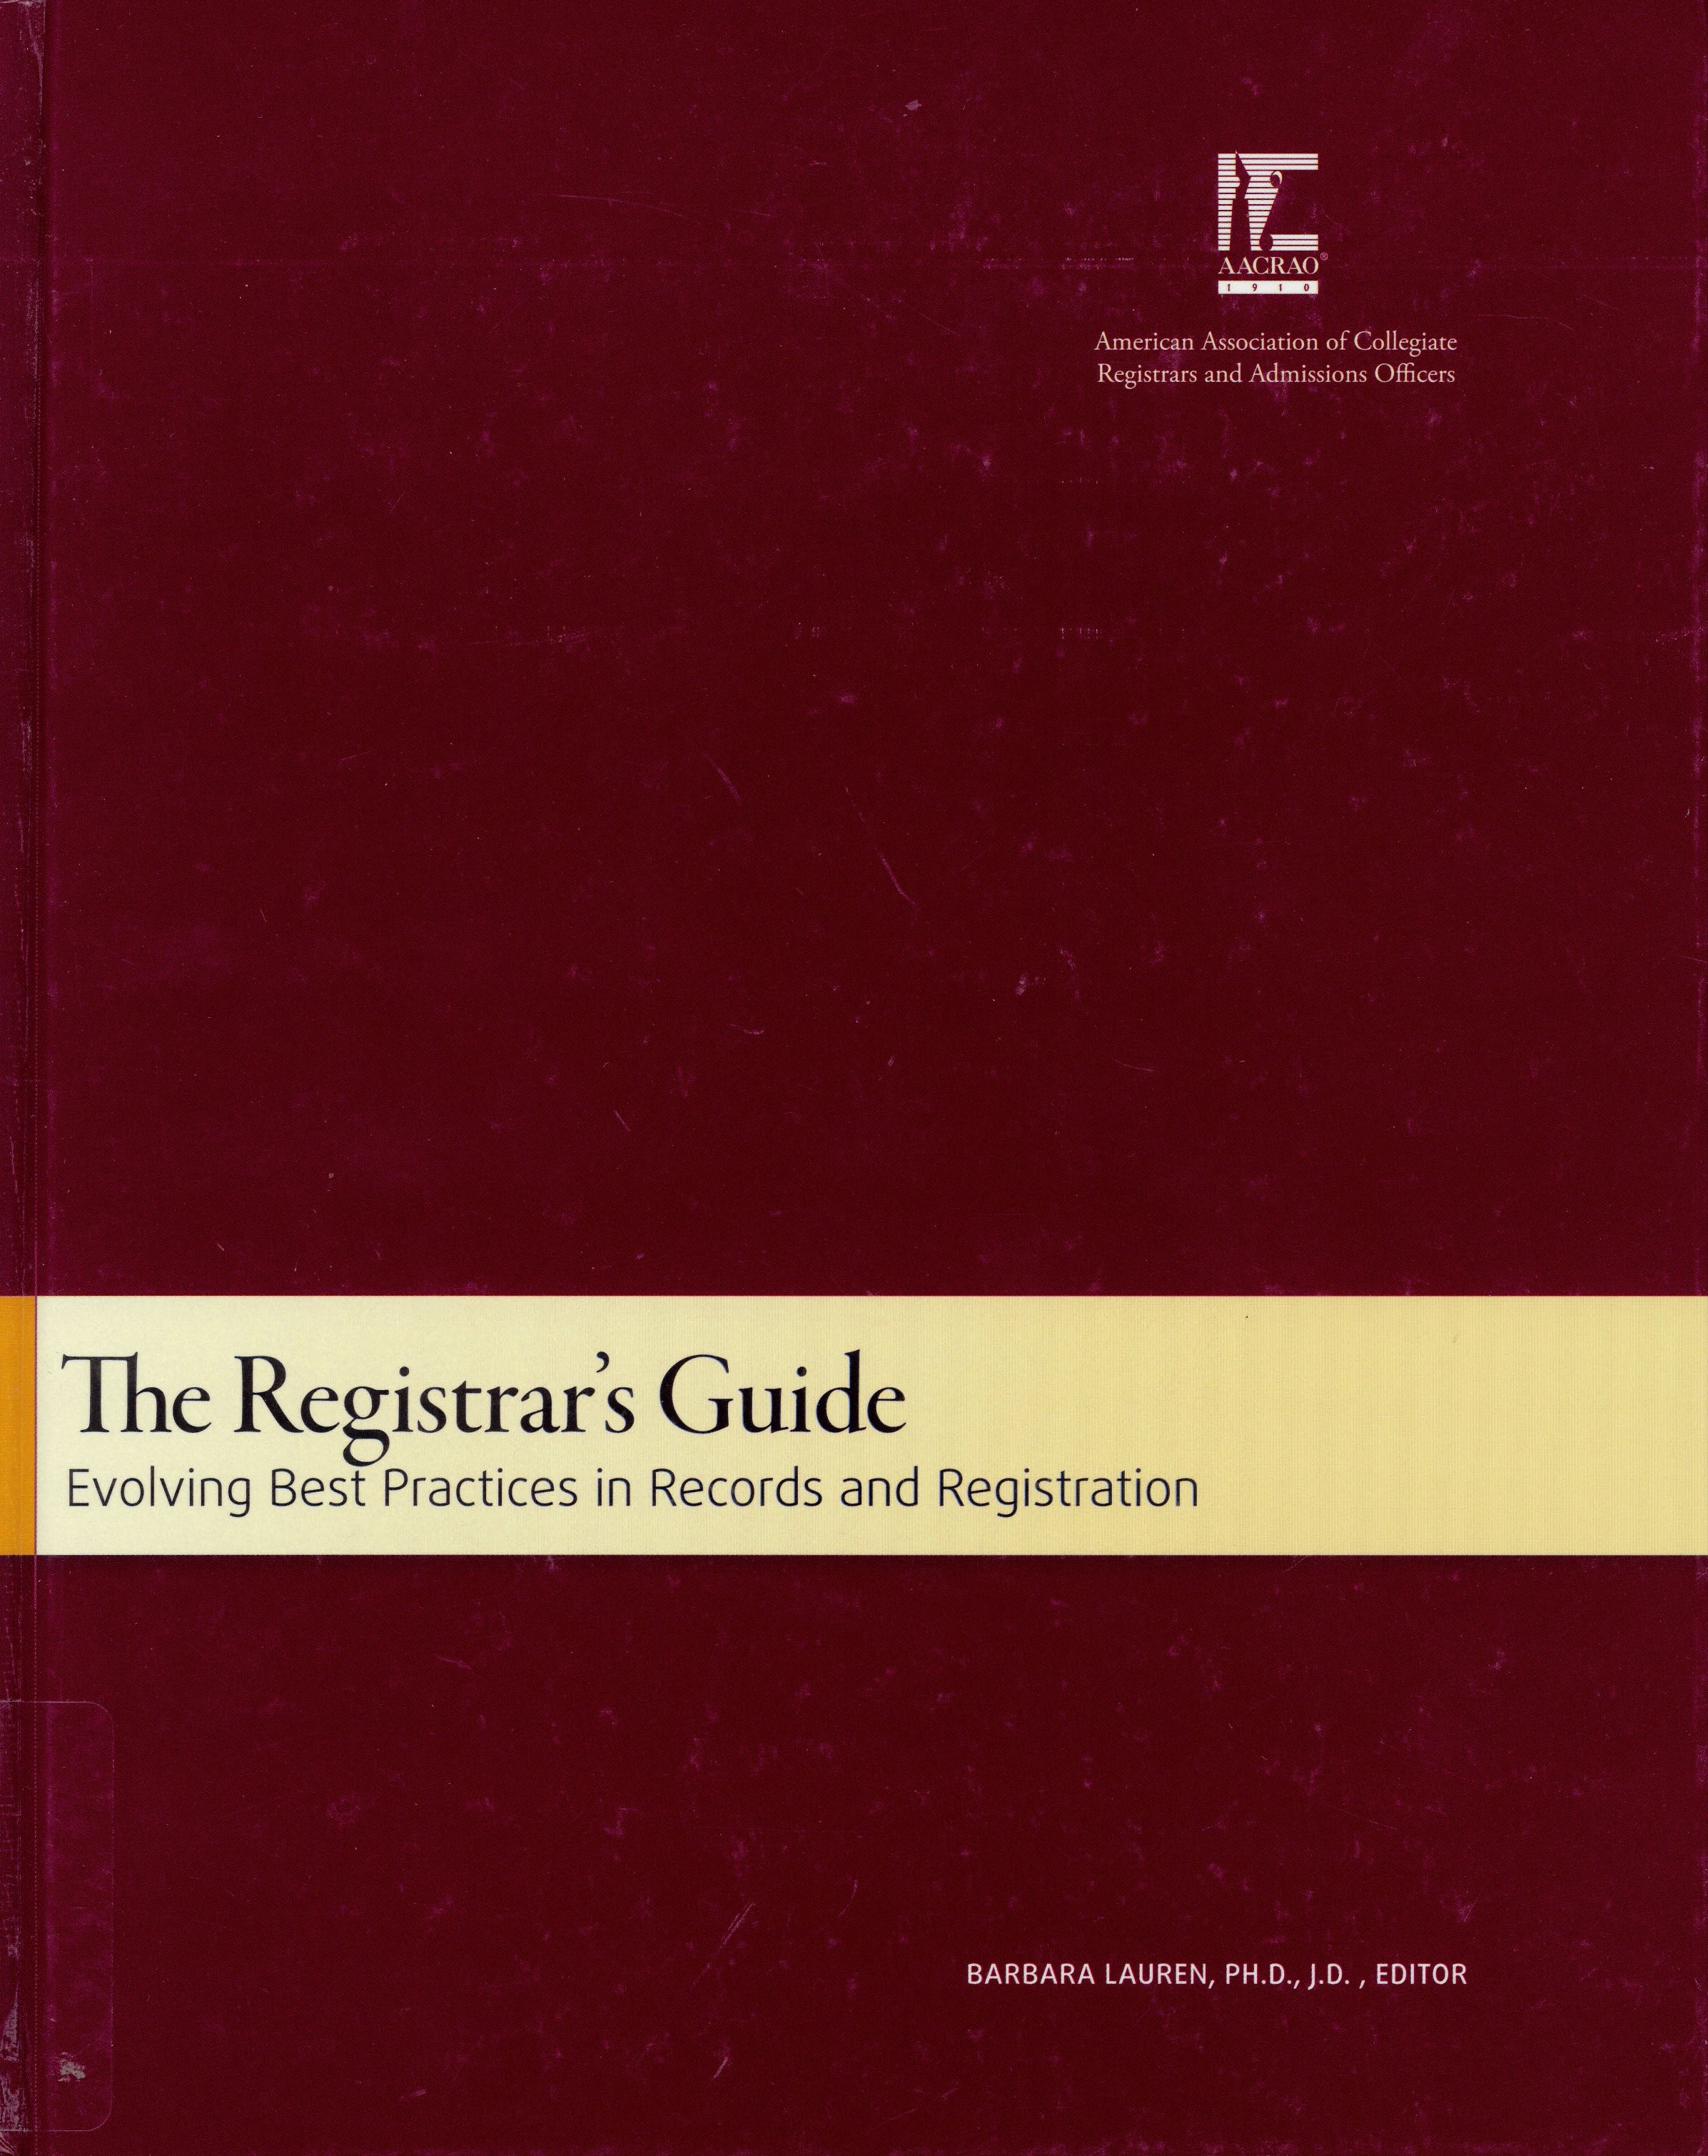 The registrar's guide : evolving best practices in records and registration